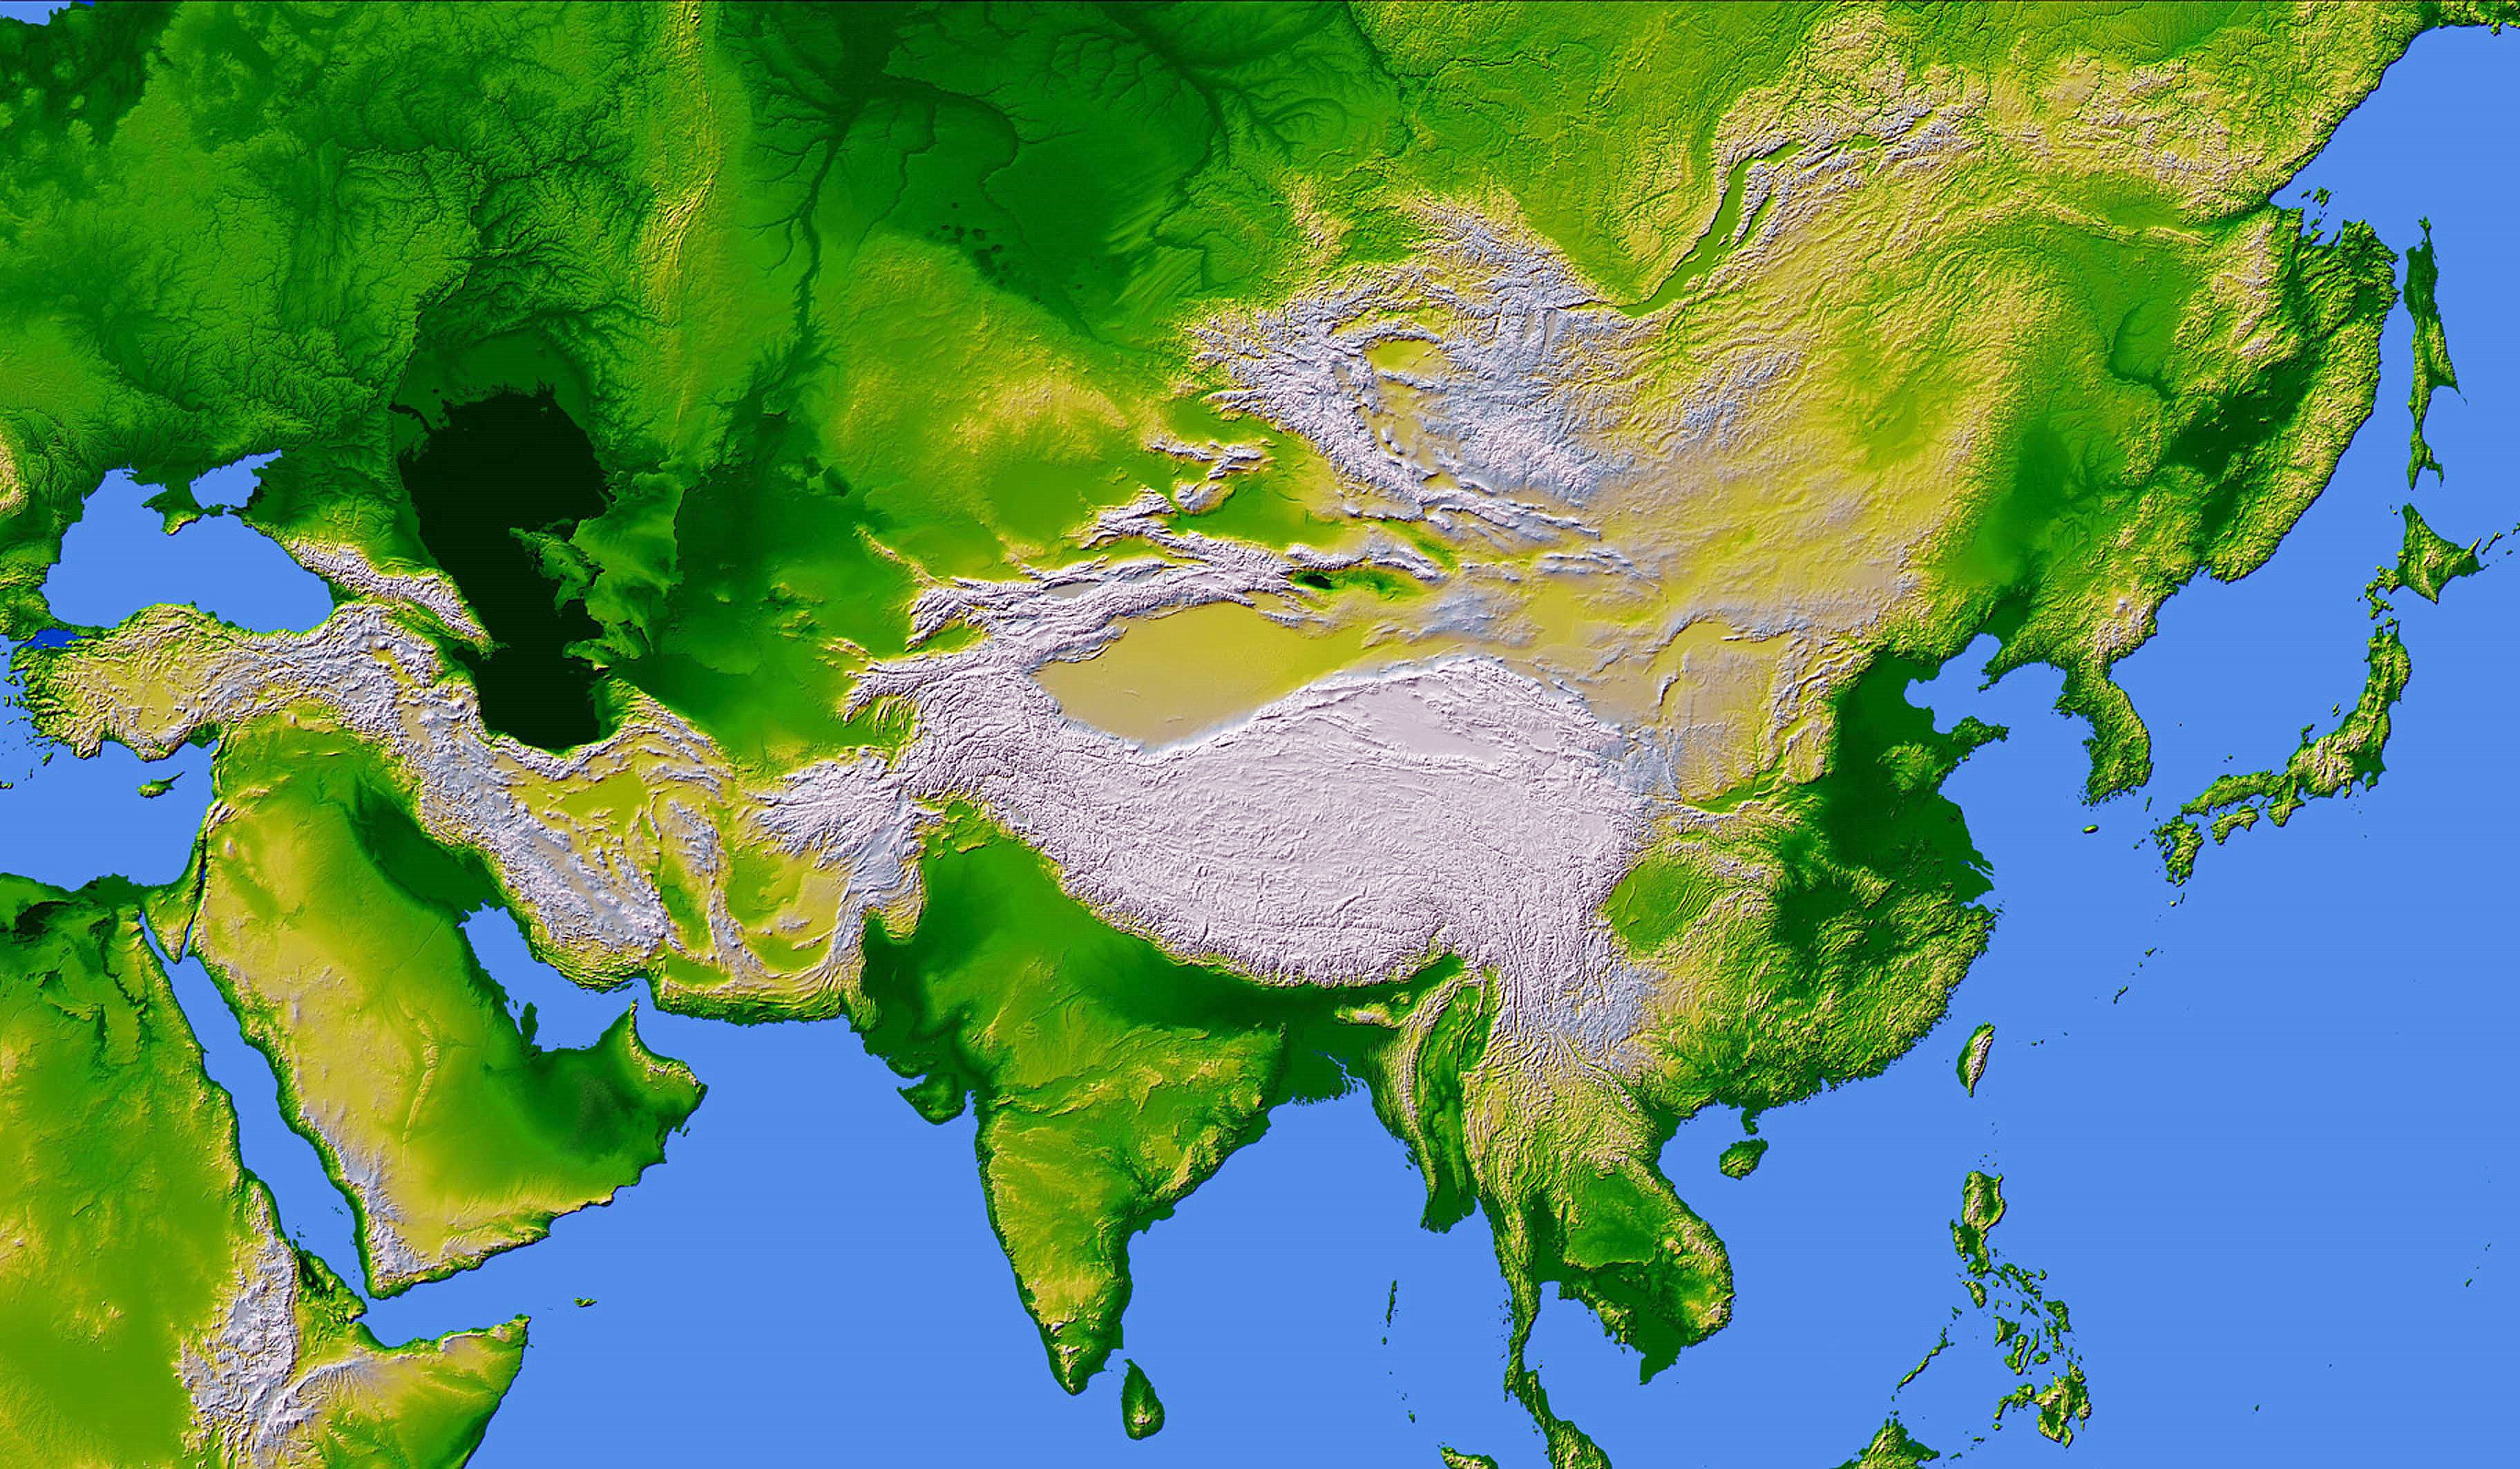 Full color elevation map of Asia.